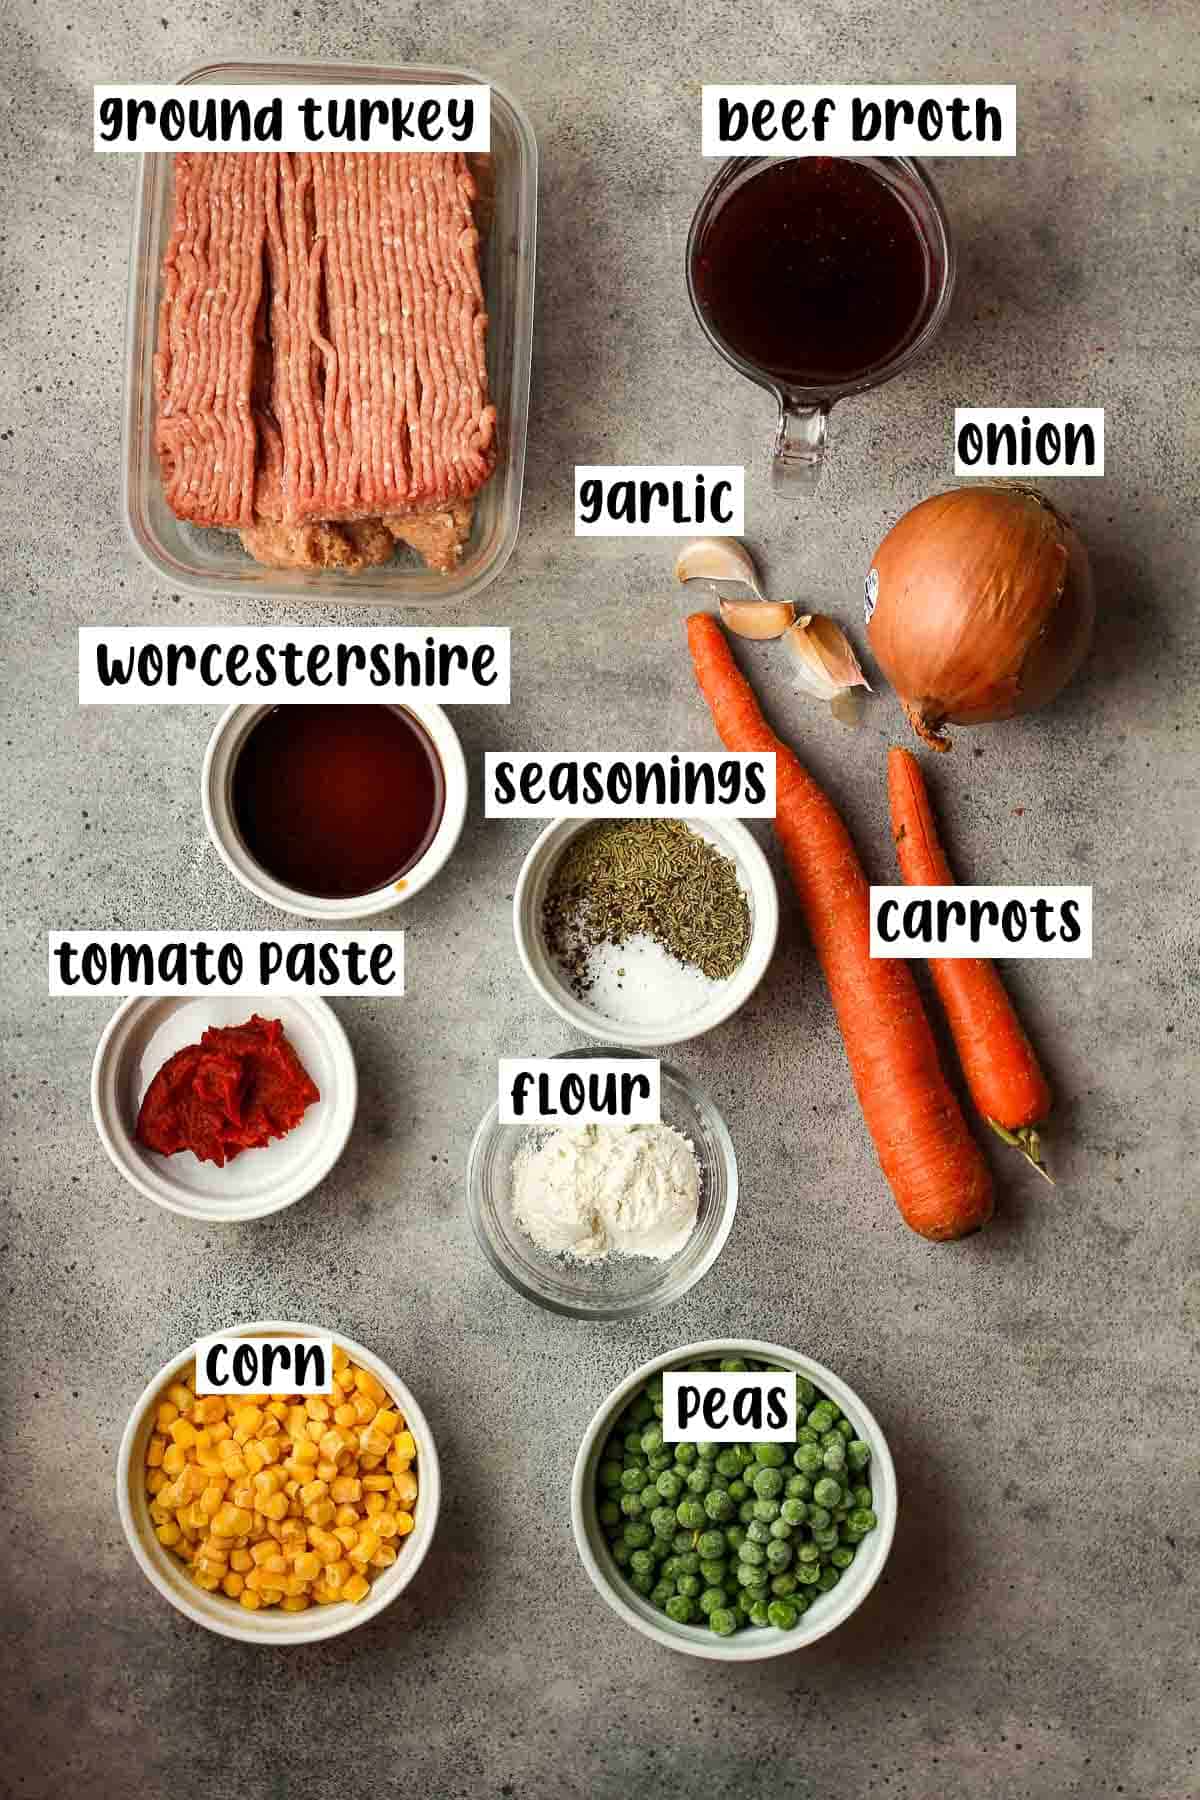 The ingredients for the meat base of the shepherd's pie.